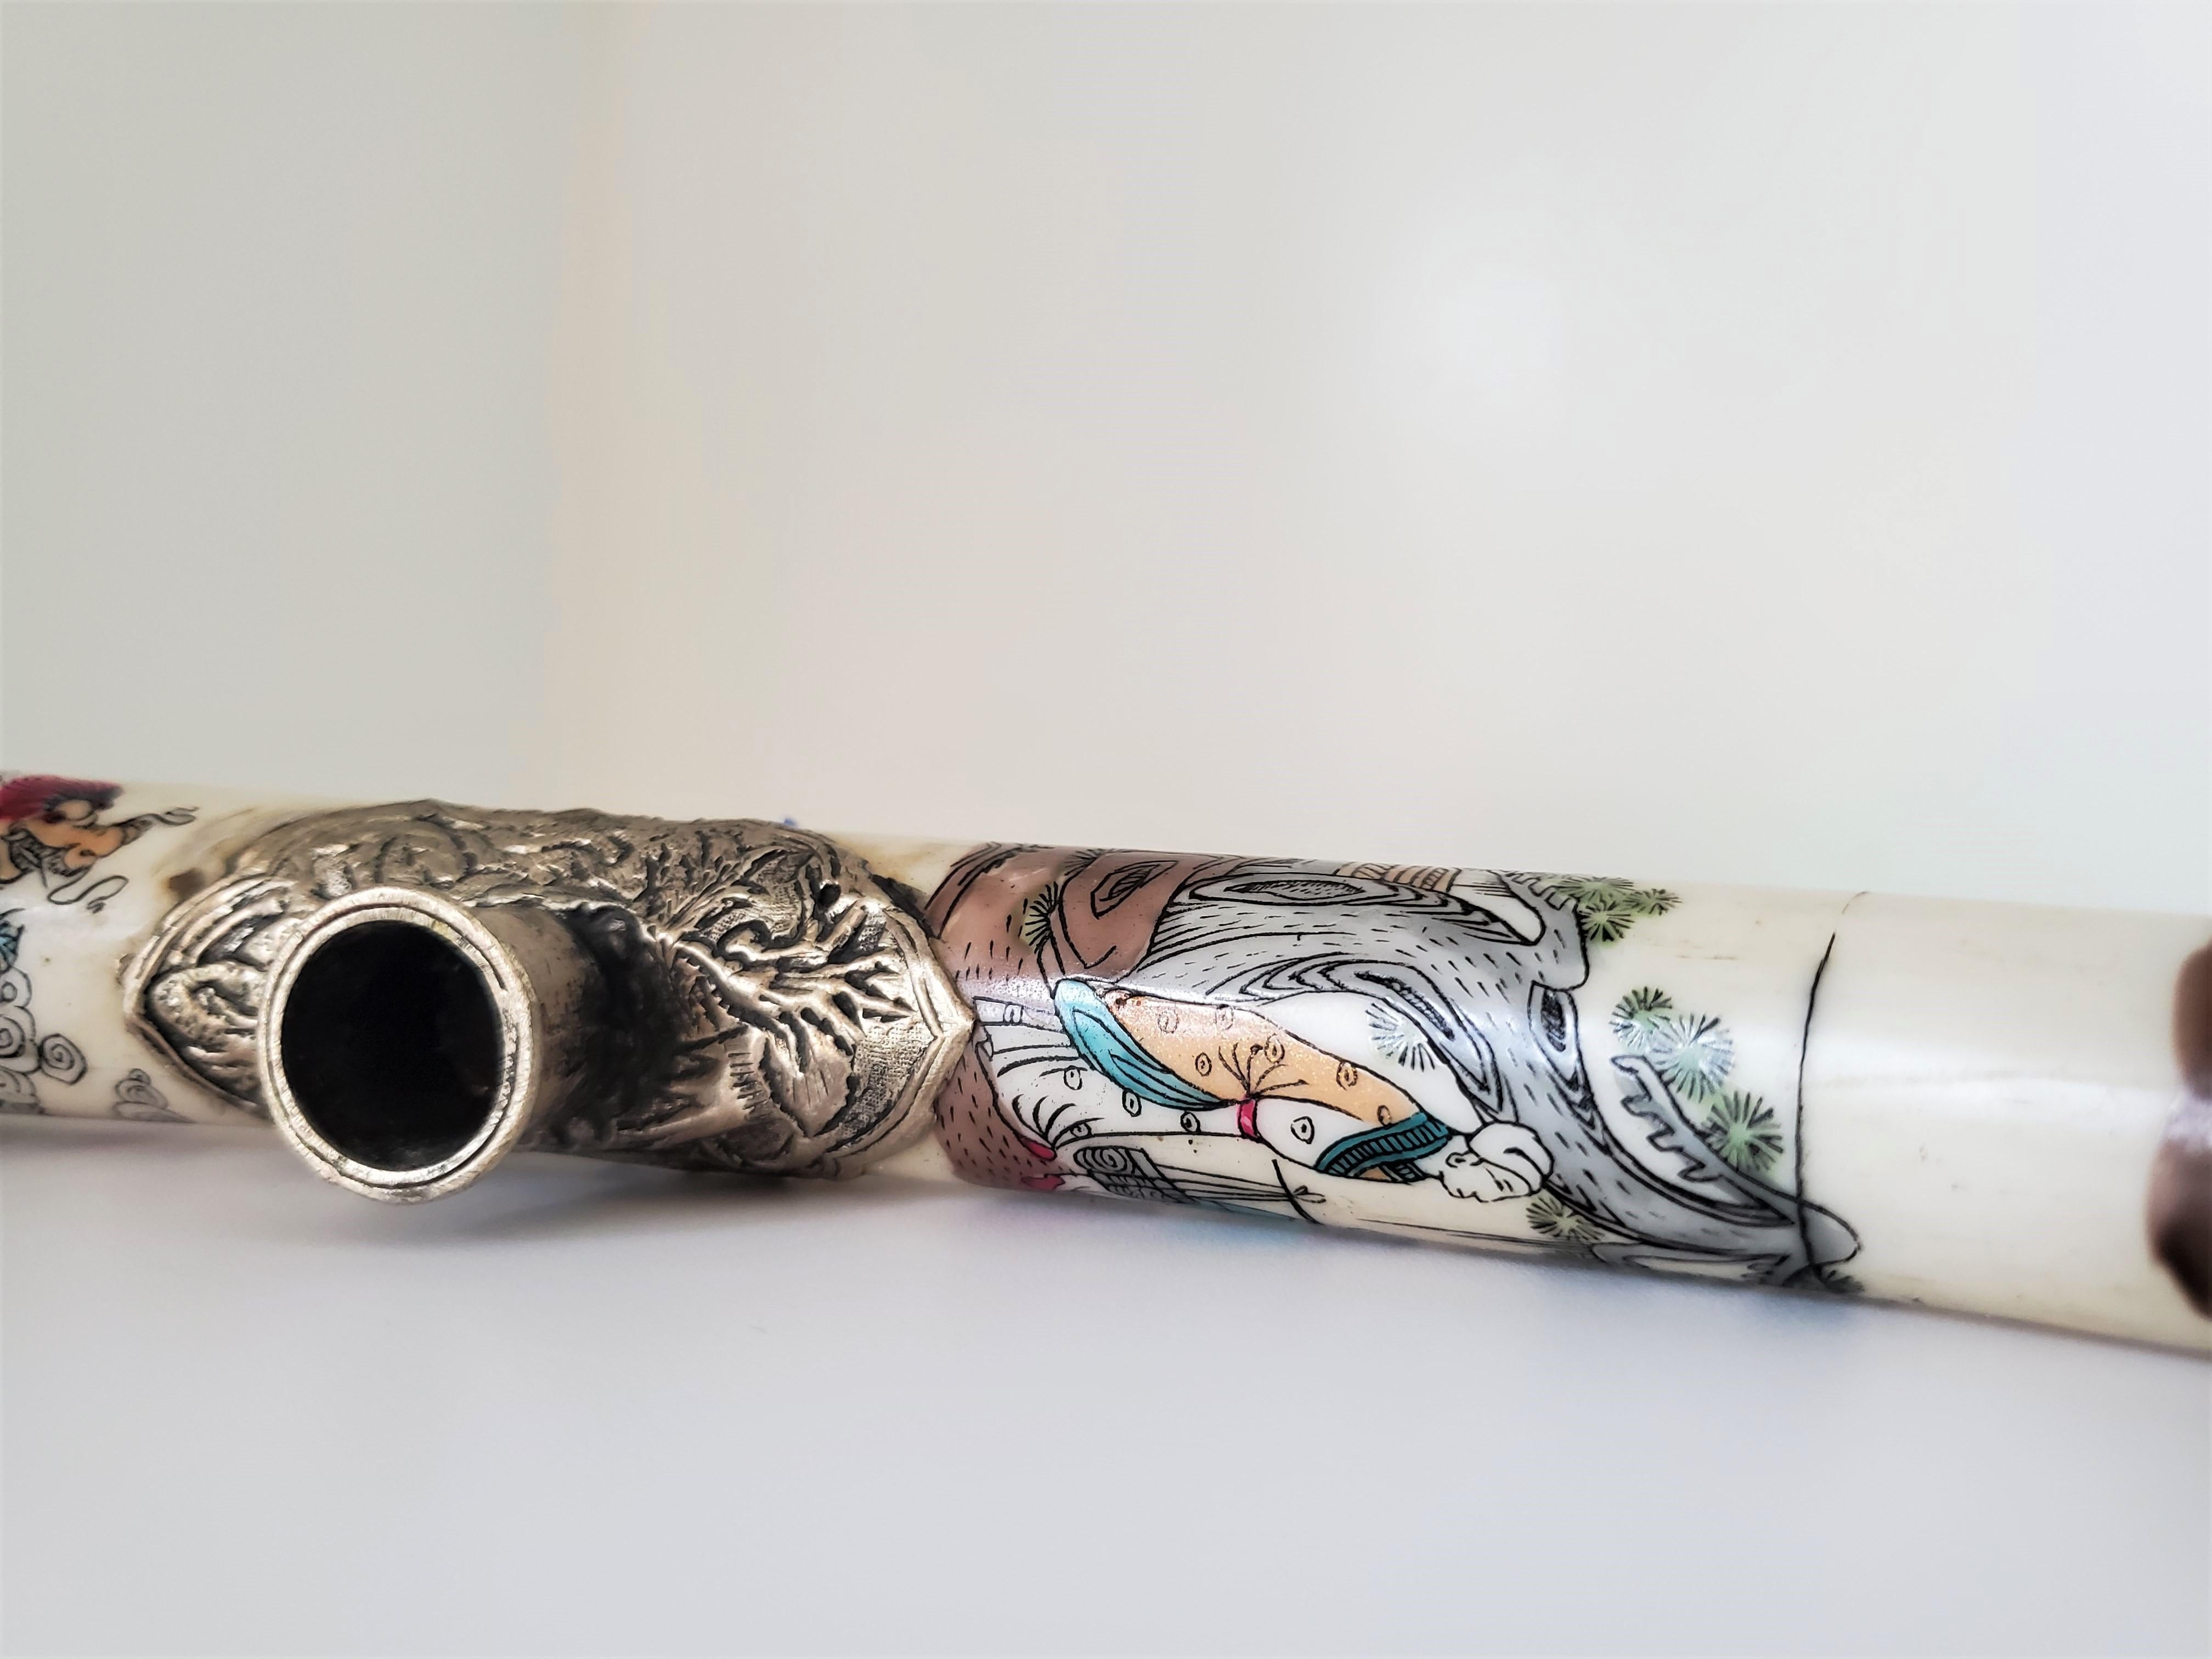 Etched Vintage Signed Chinese Opium Pipe Made with Bone and Silver Metal Detailing